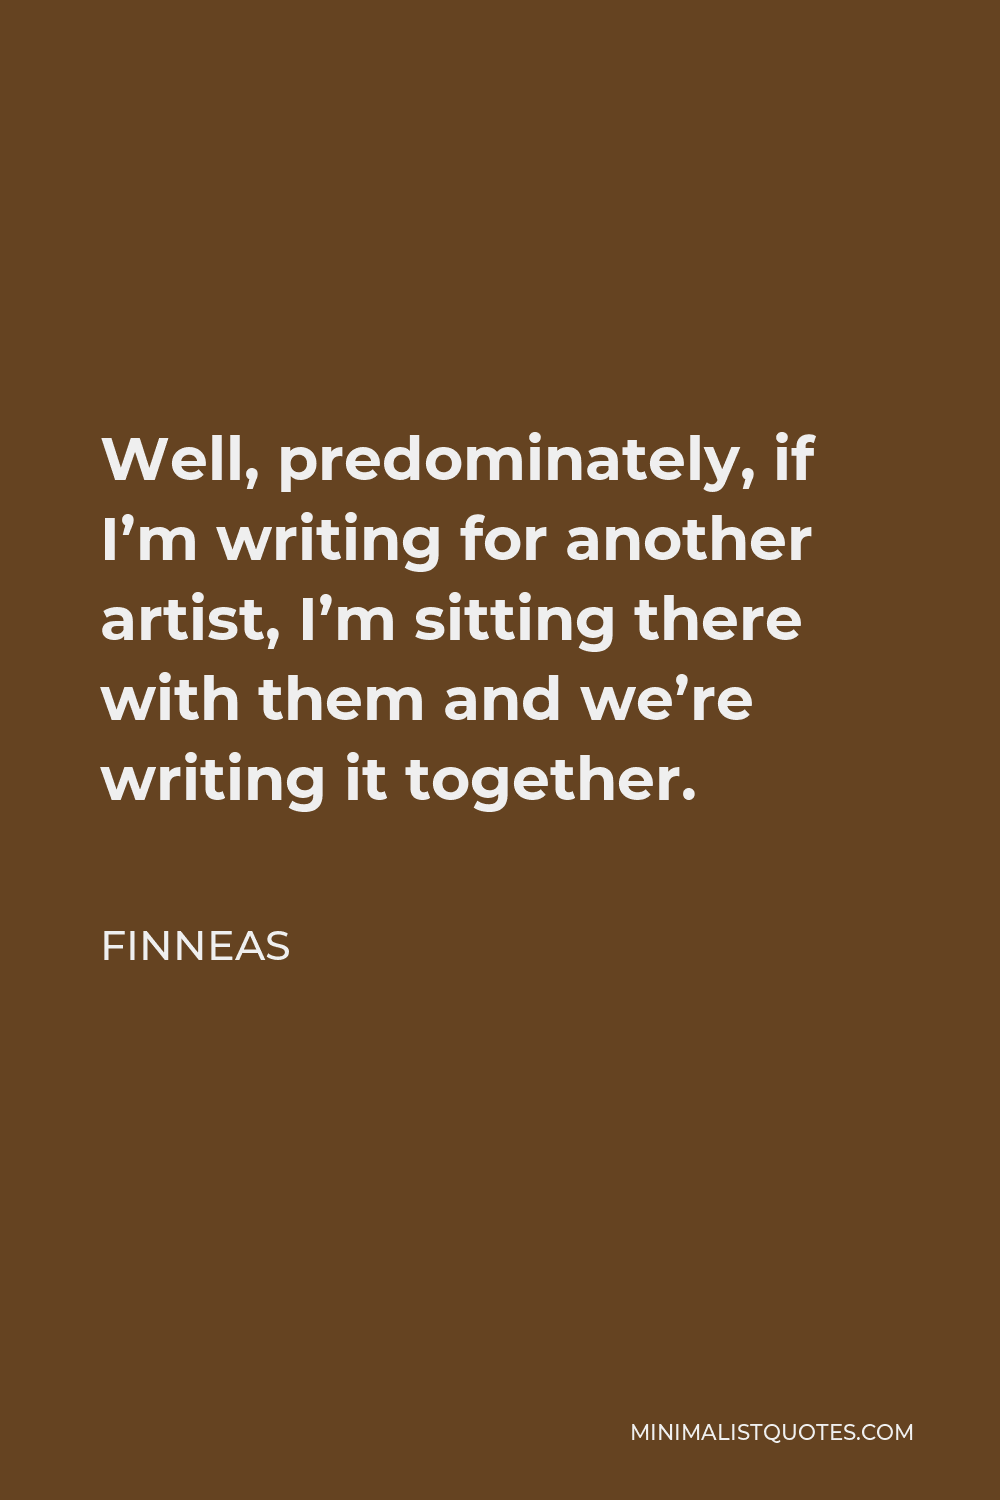 Finneas Quote - Well, predominately, if I’m writing for another artist, I’m sitting there with them and we’re writing it together.